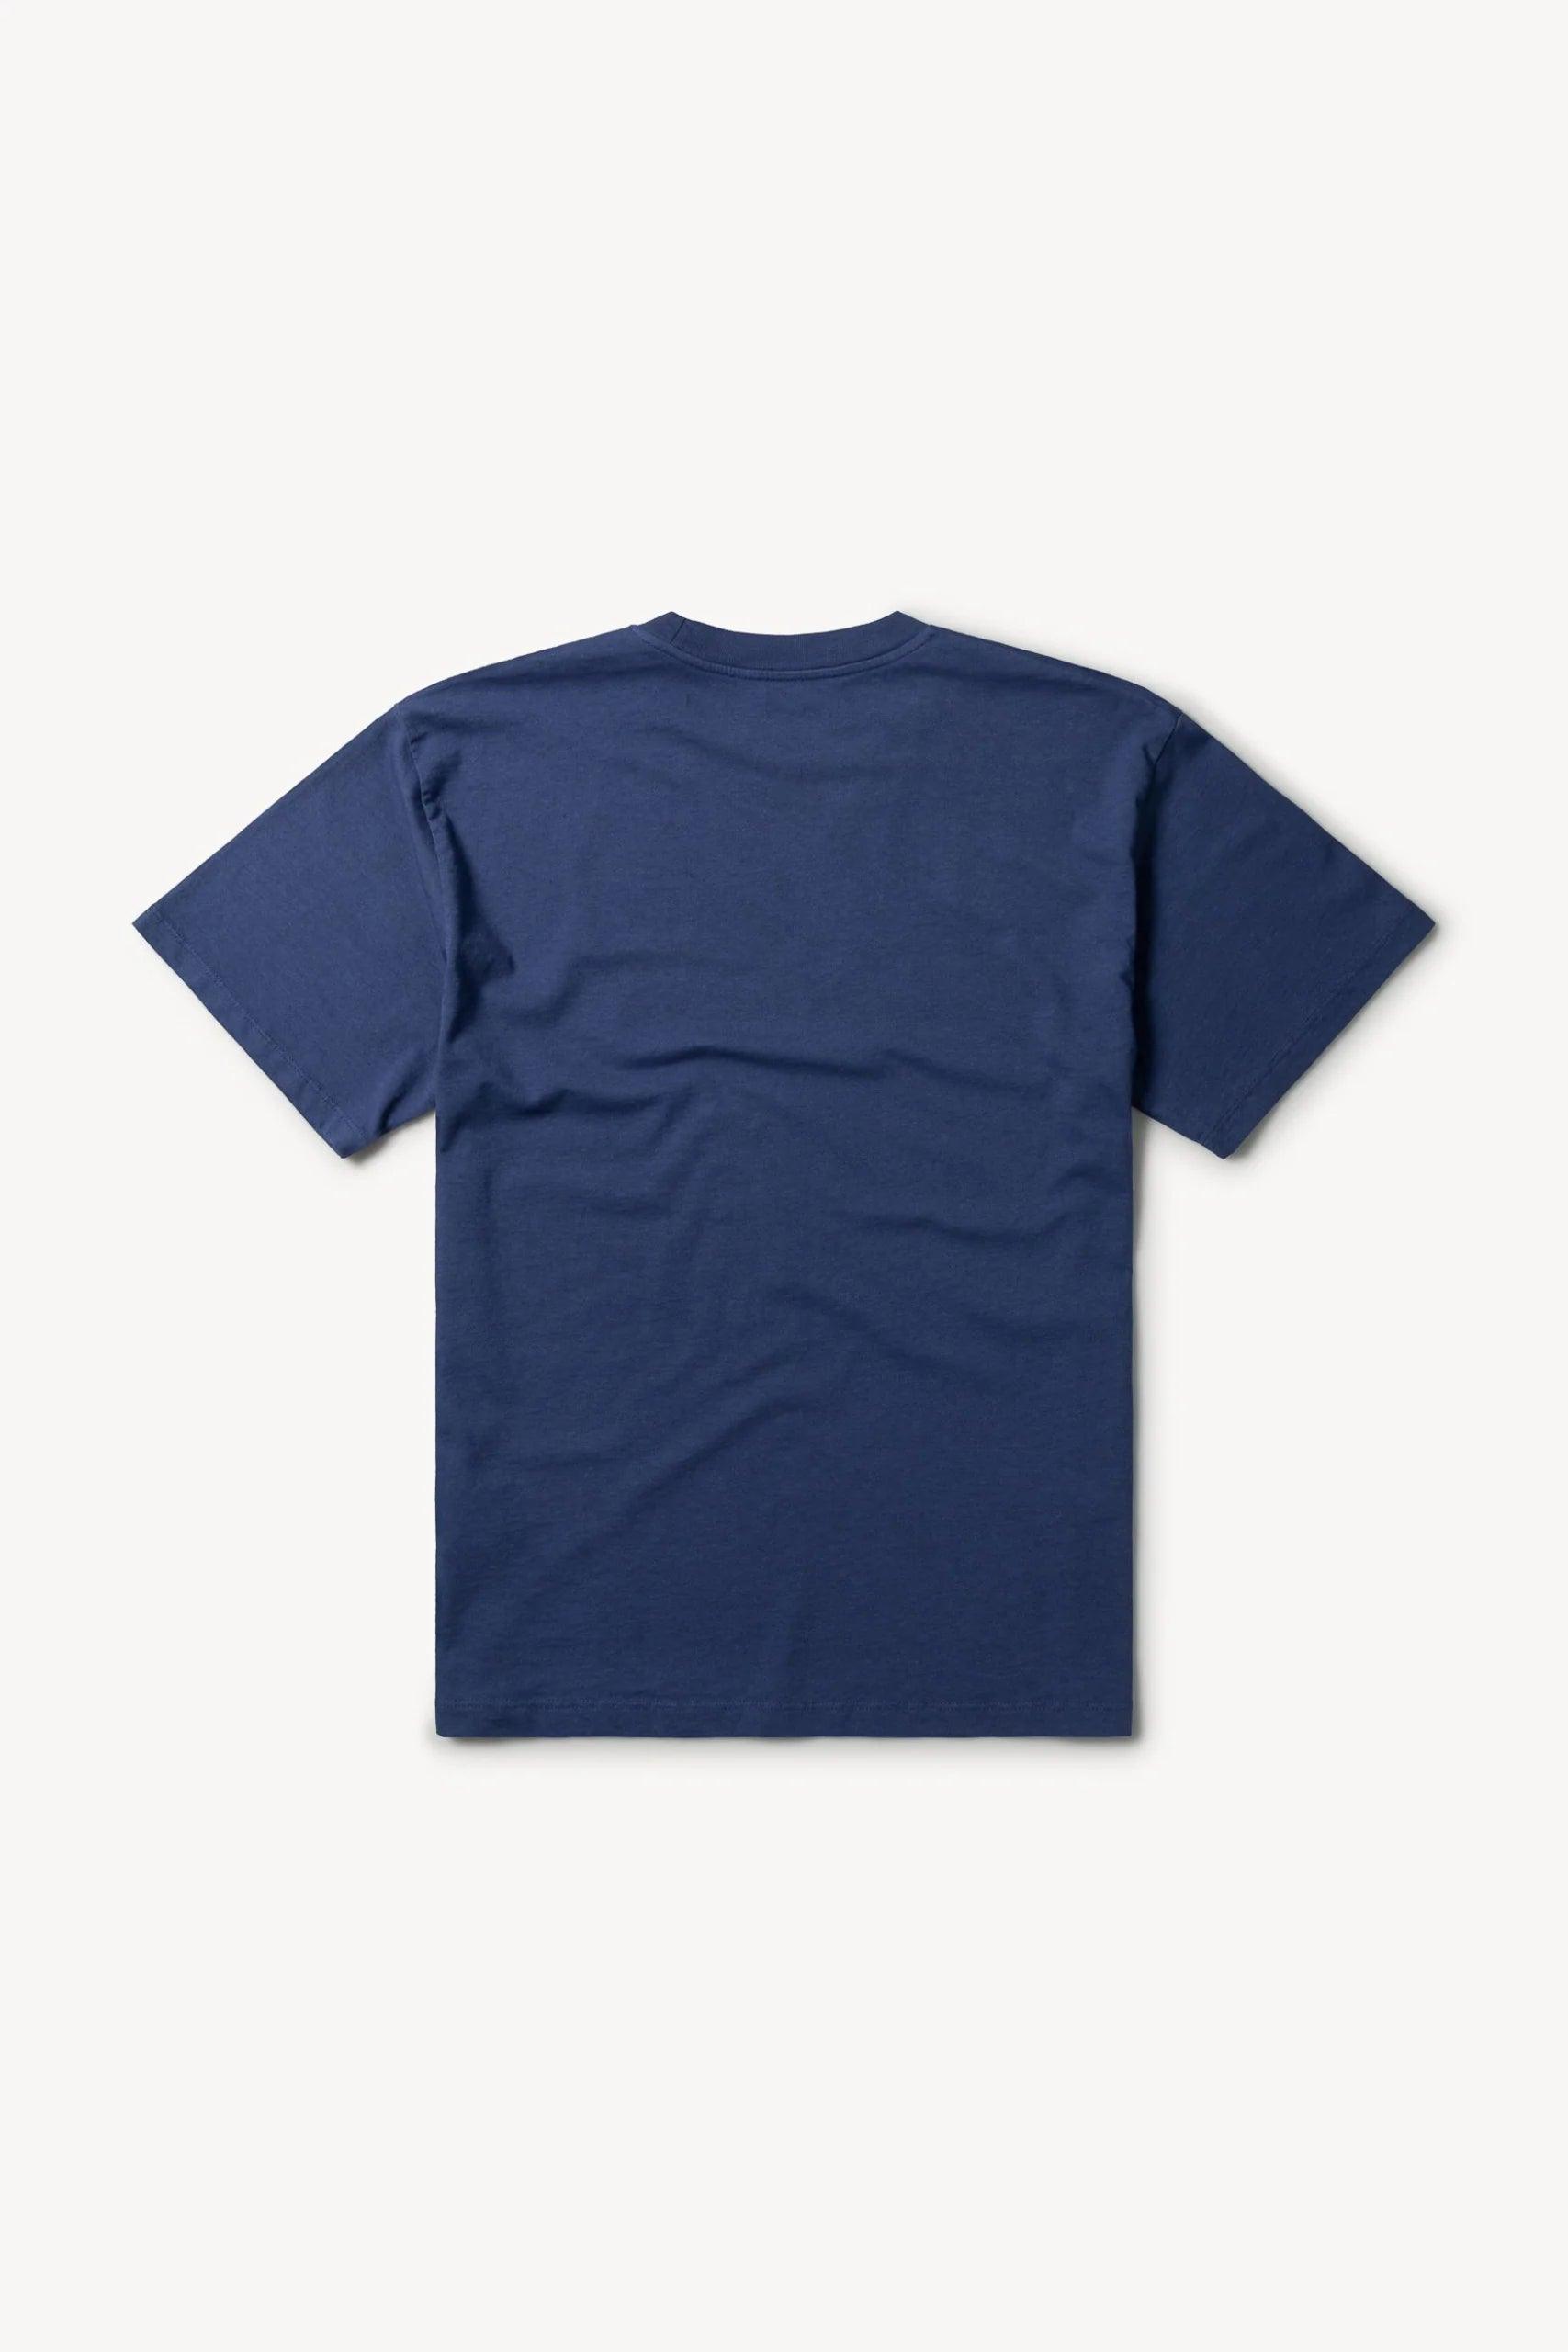 Aries Arise The No Problemo SS Tee - Navy - T-Shirts